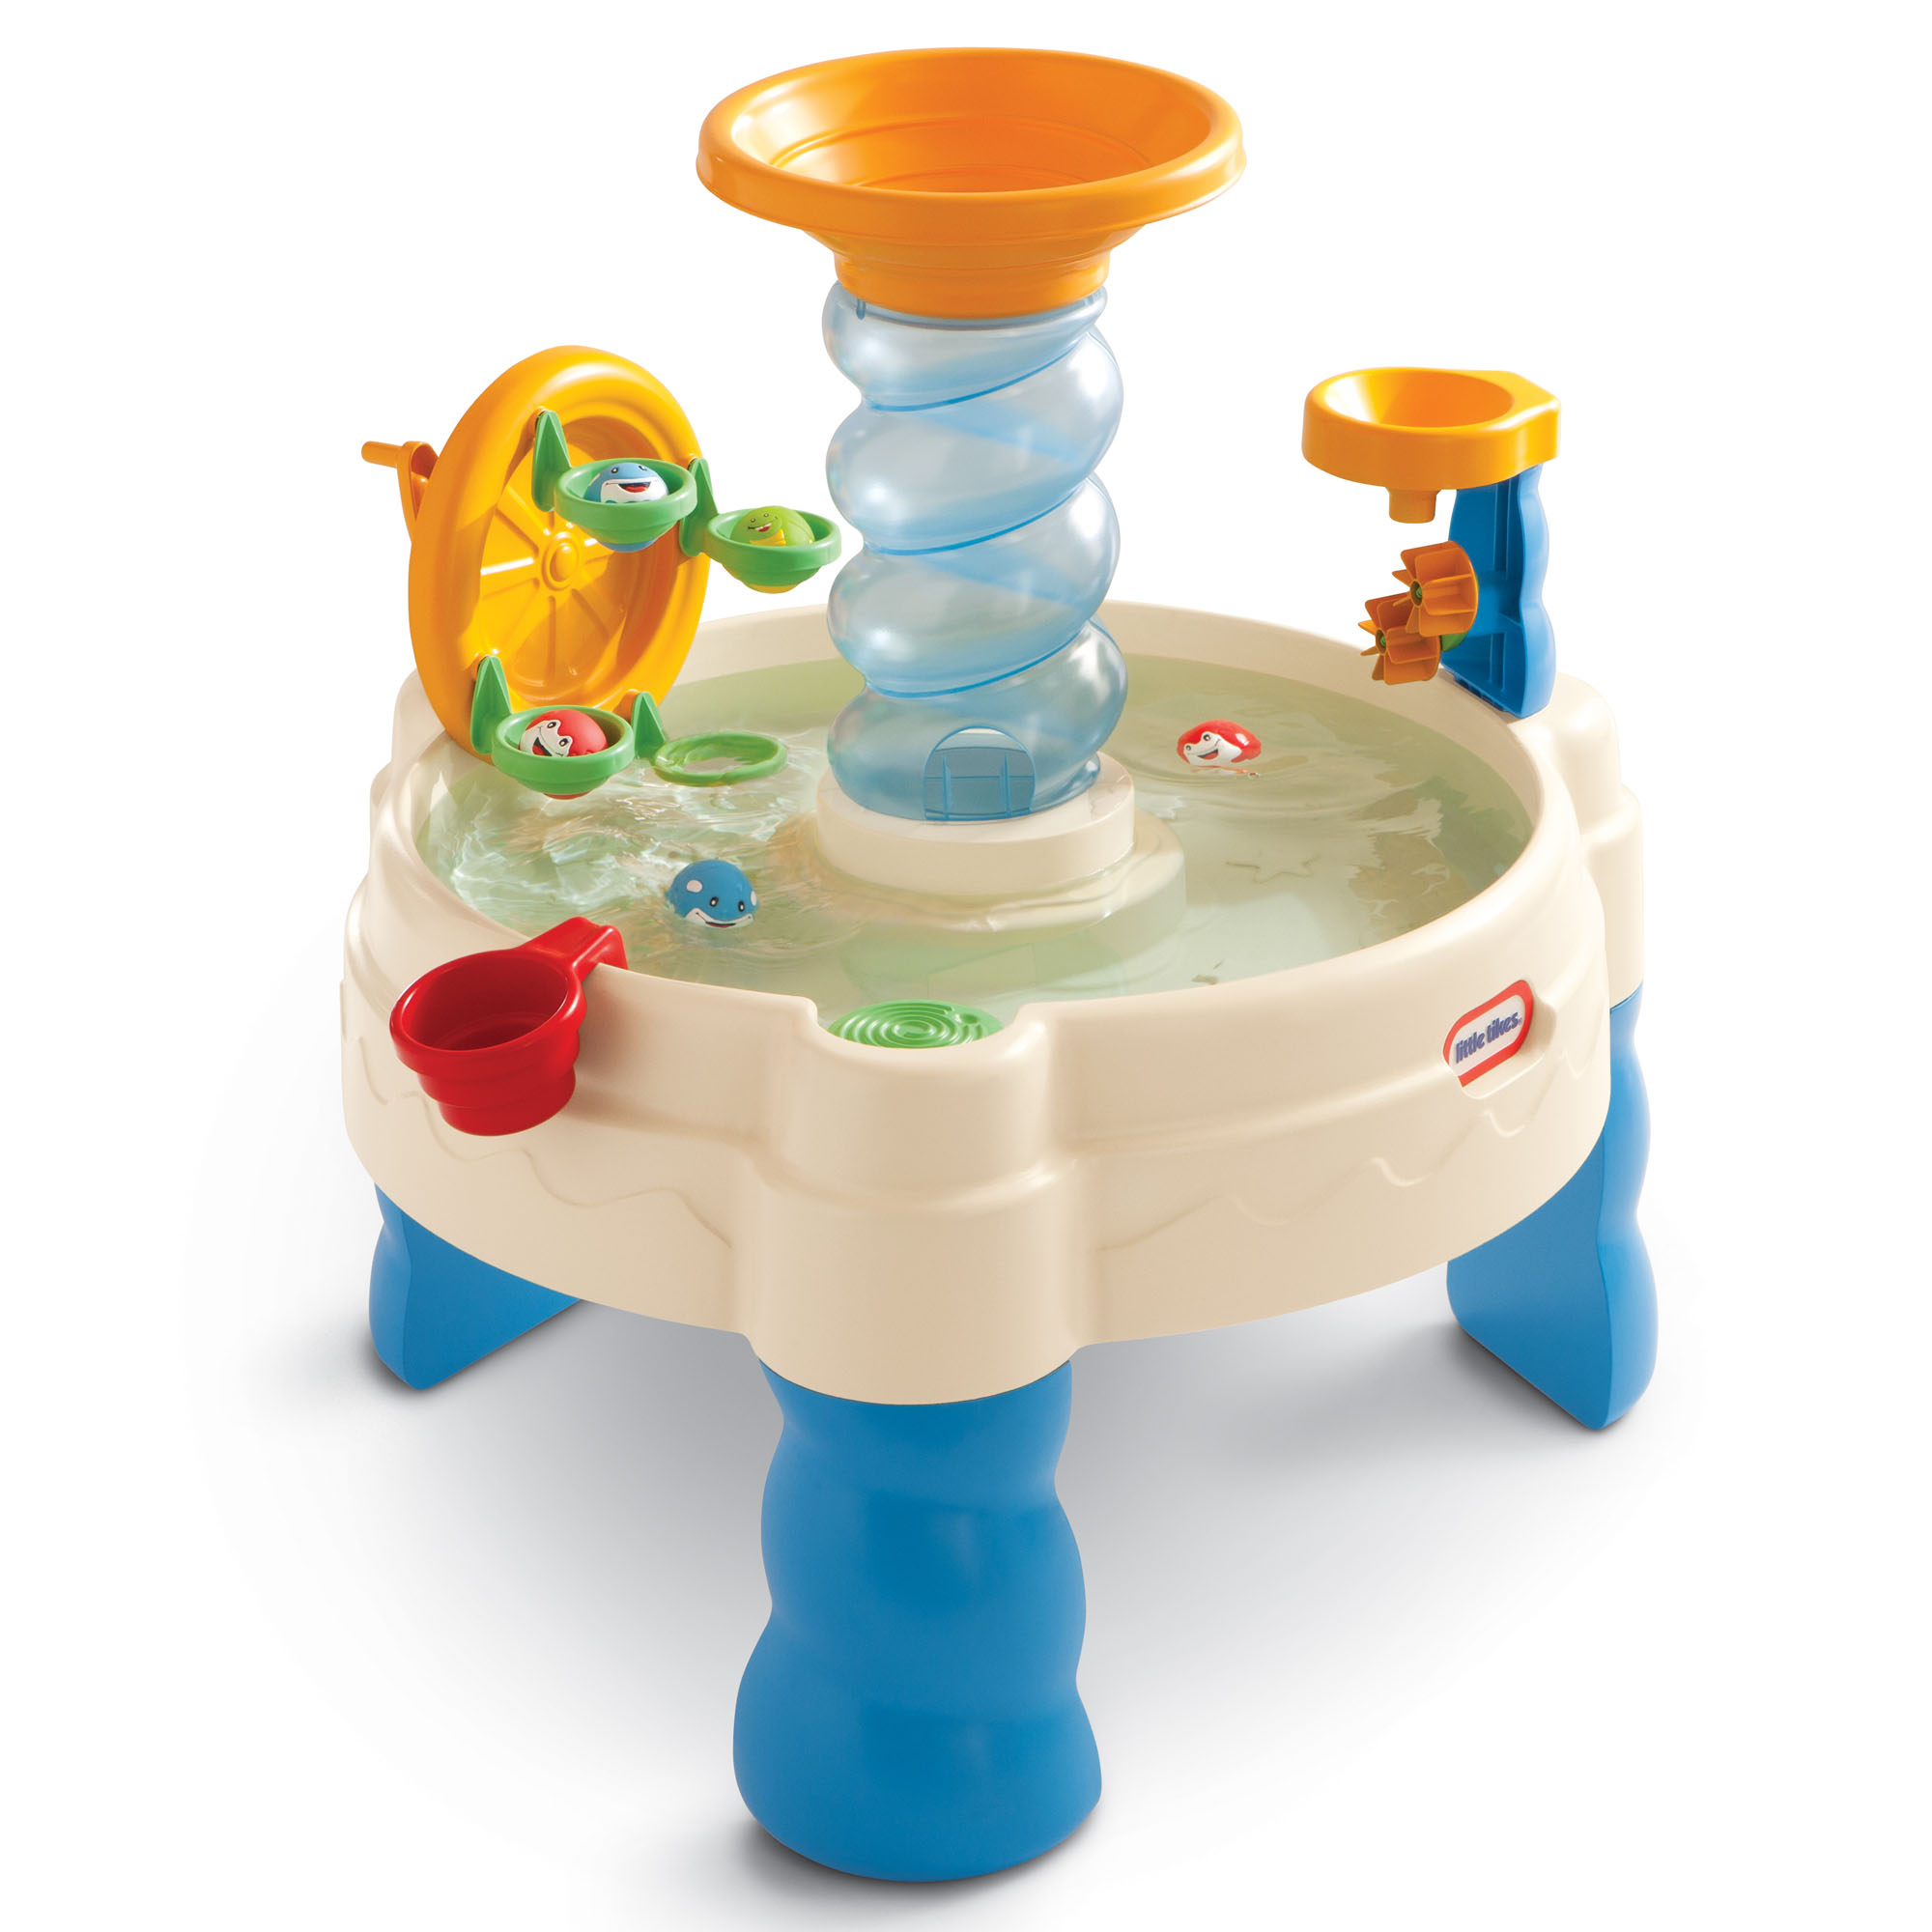 Little Tikes Spiralin' Seas Water Park Water Table with Lazy River Splash Action, Water Wheel and 6 Piece Accessory Set, Outdoor Backyard Play Set for Toddlers Kids Boys Girls Ages 2 3 4+ Year Old - image 3 of 9